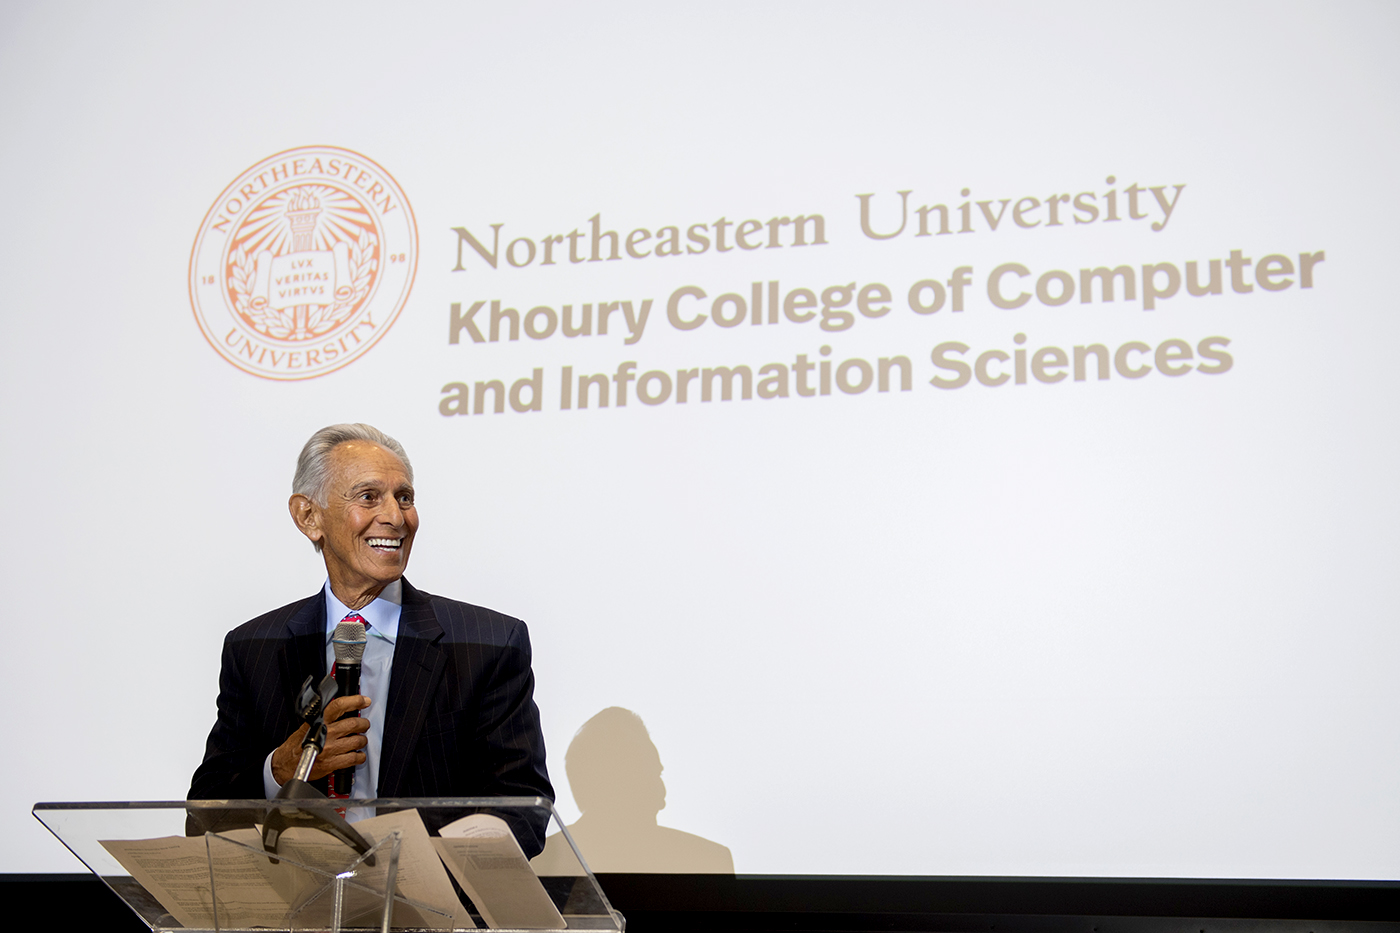 Northeastern establishes the Khoury College of Computer and Information Sciences